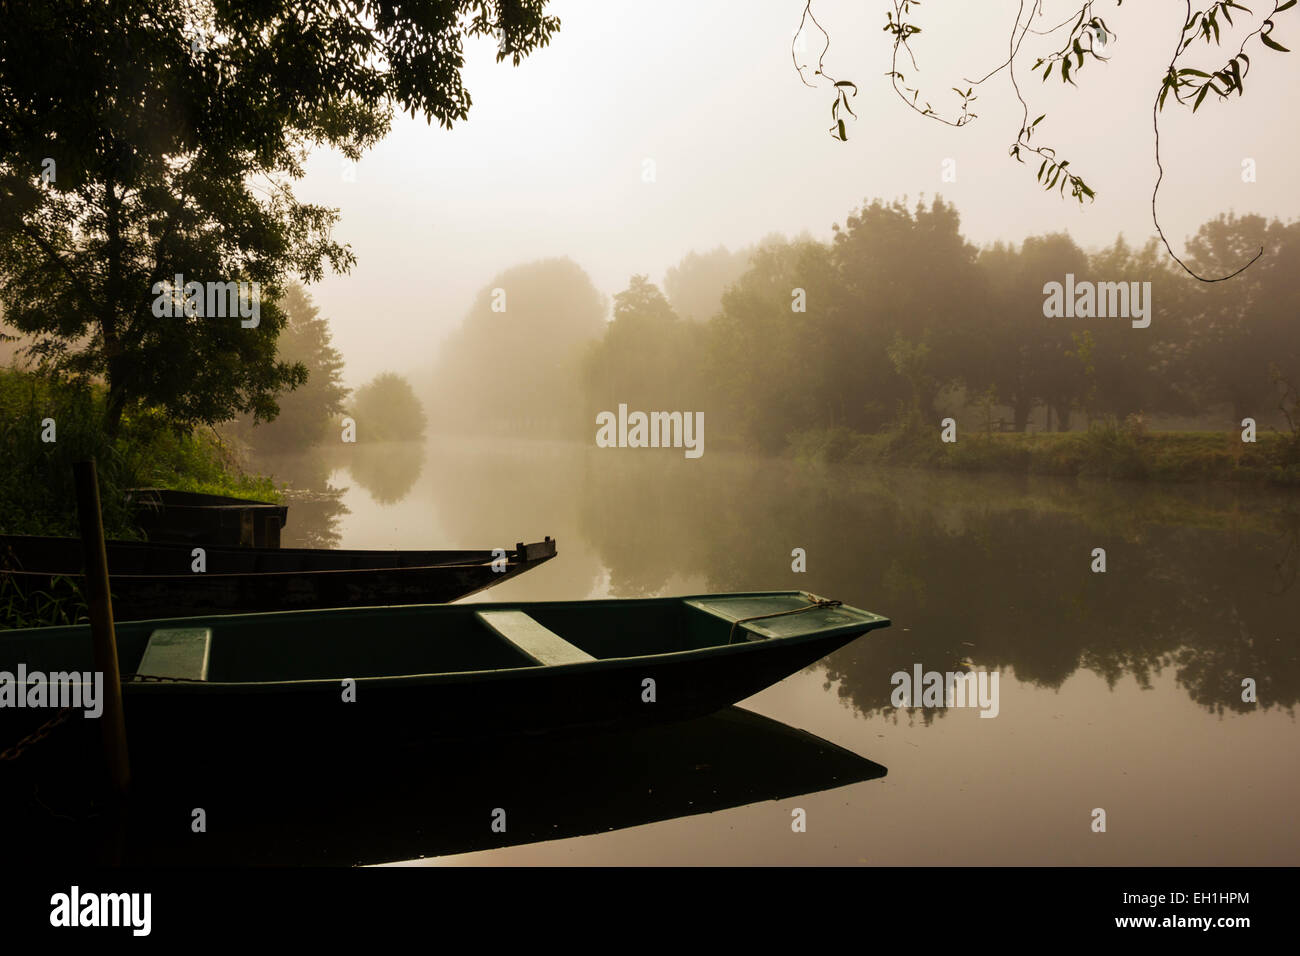 Boats on the River Sevre at dawn, Coulon, Deux Sevres, France Stock Photo